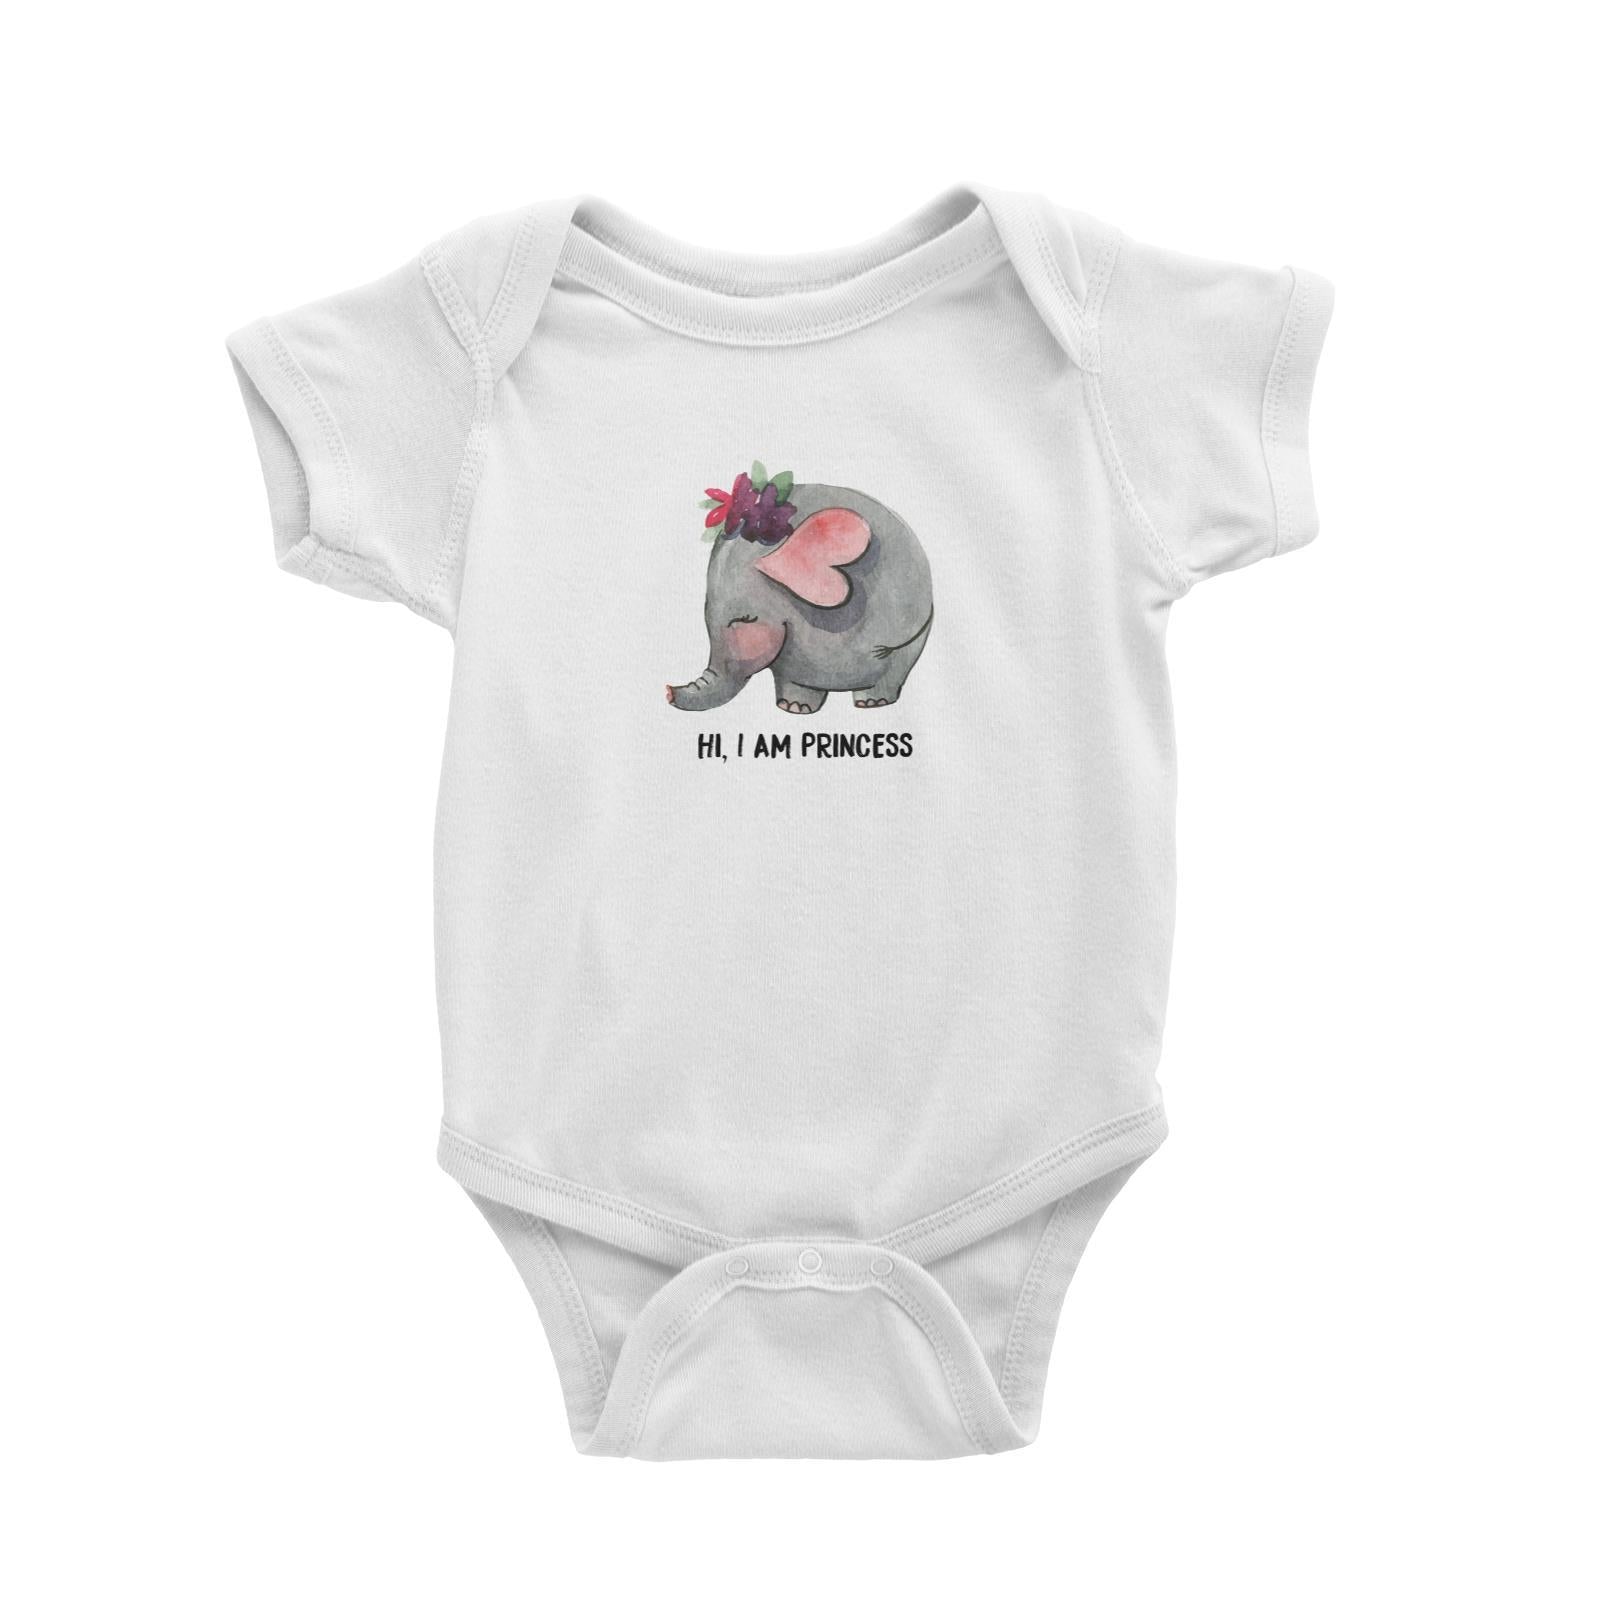 Watercolour Cute Princess Elephant with Addname Baby Romper